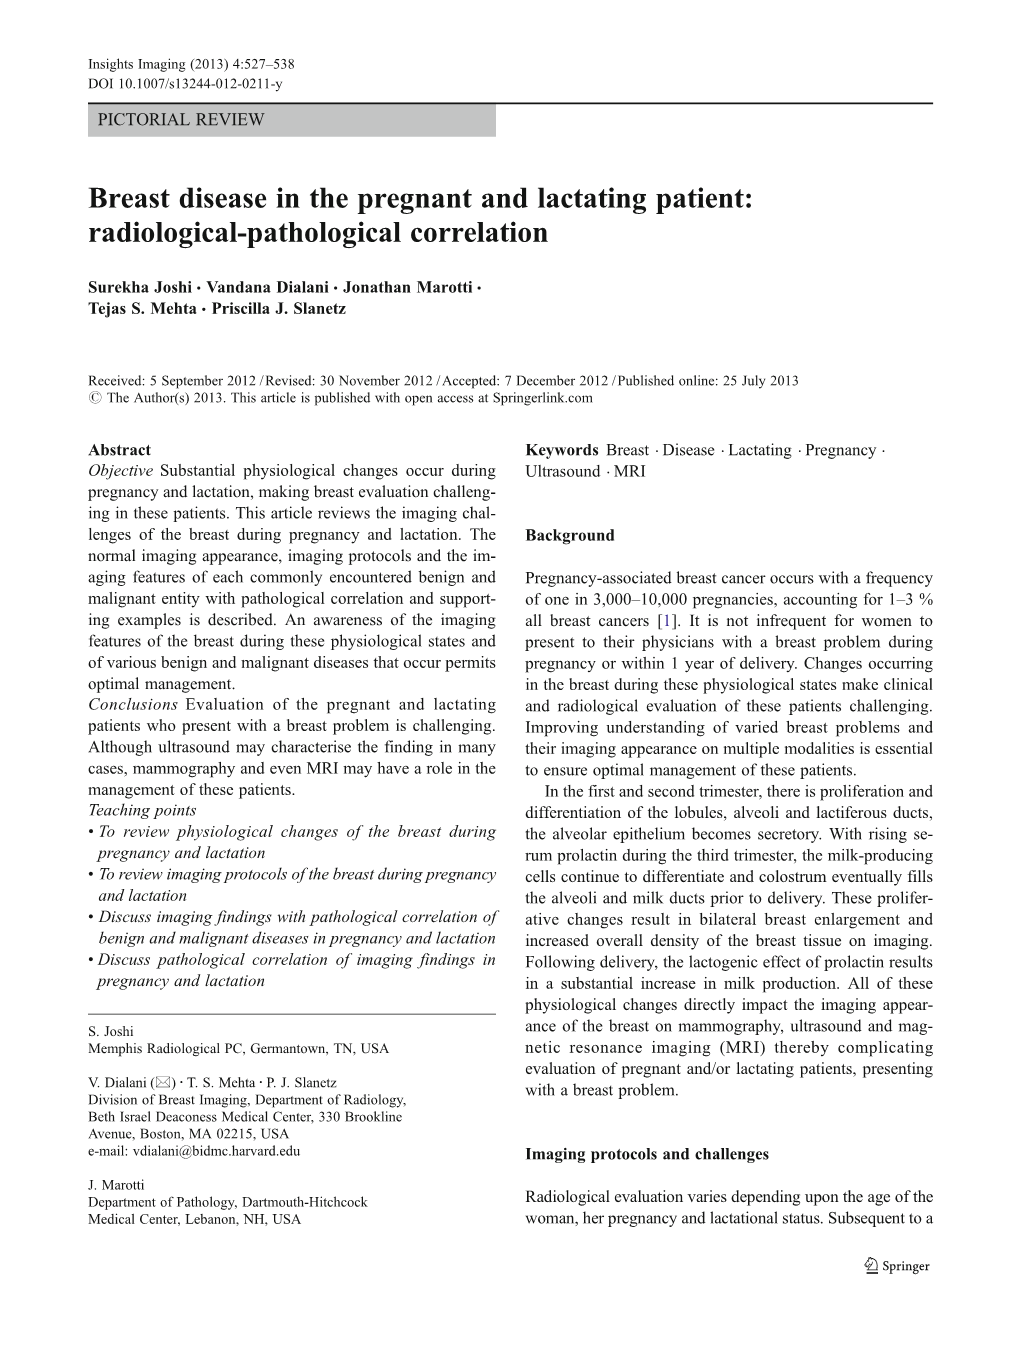 Breast Disease in the Pregnant and Lactating Patient: Radiological-Pathological Correlation